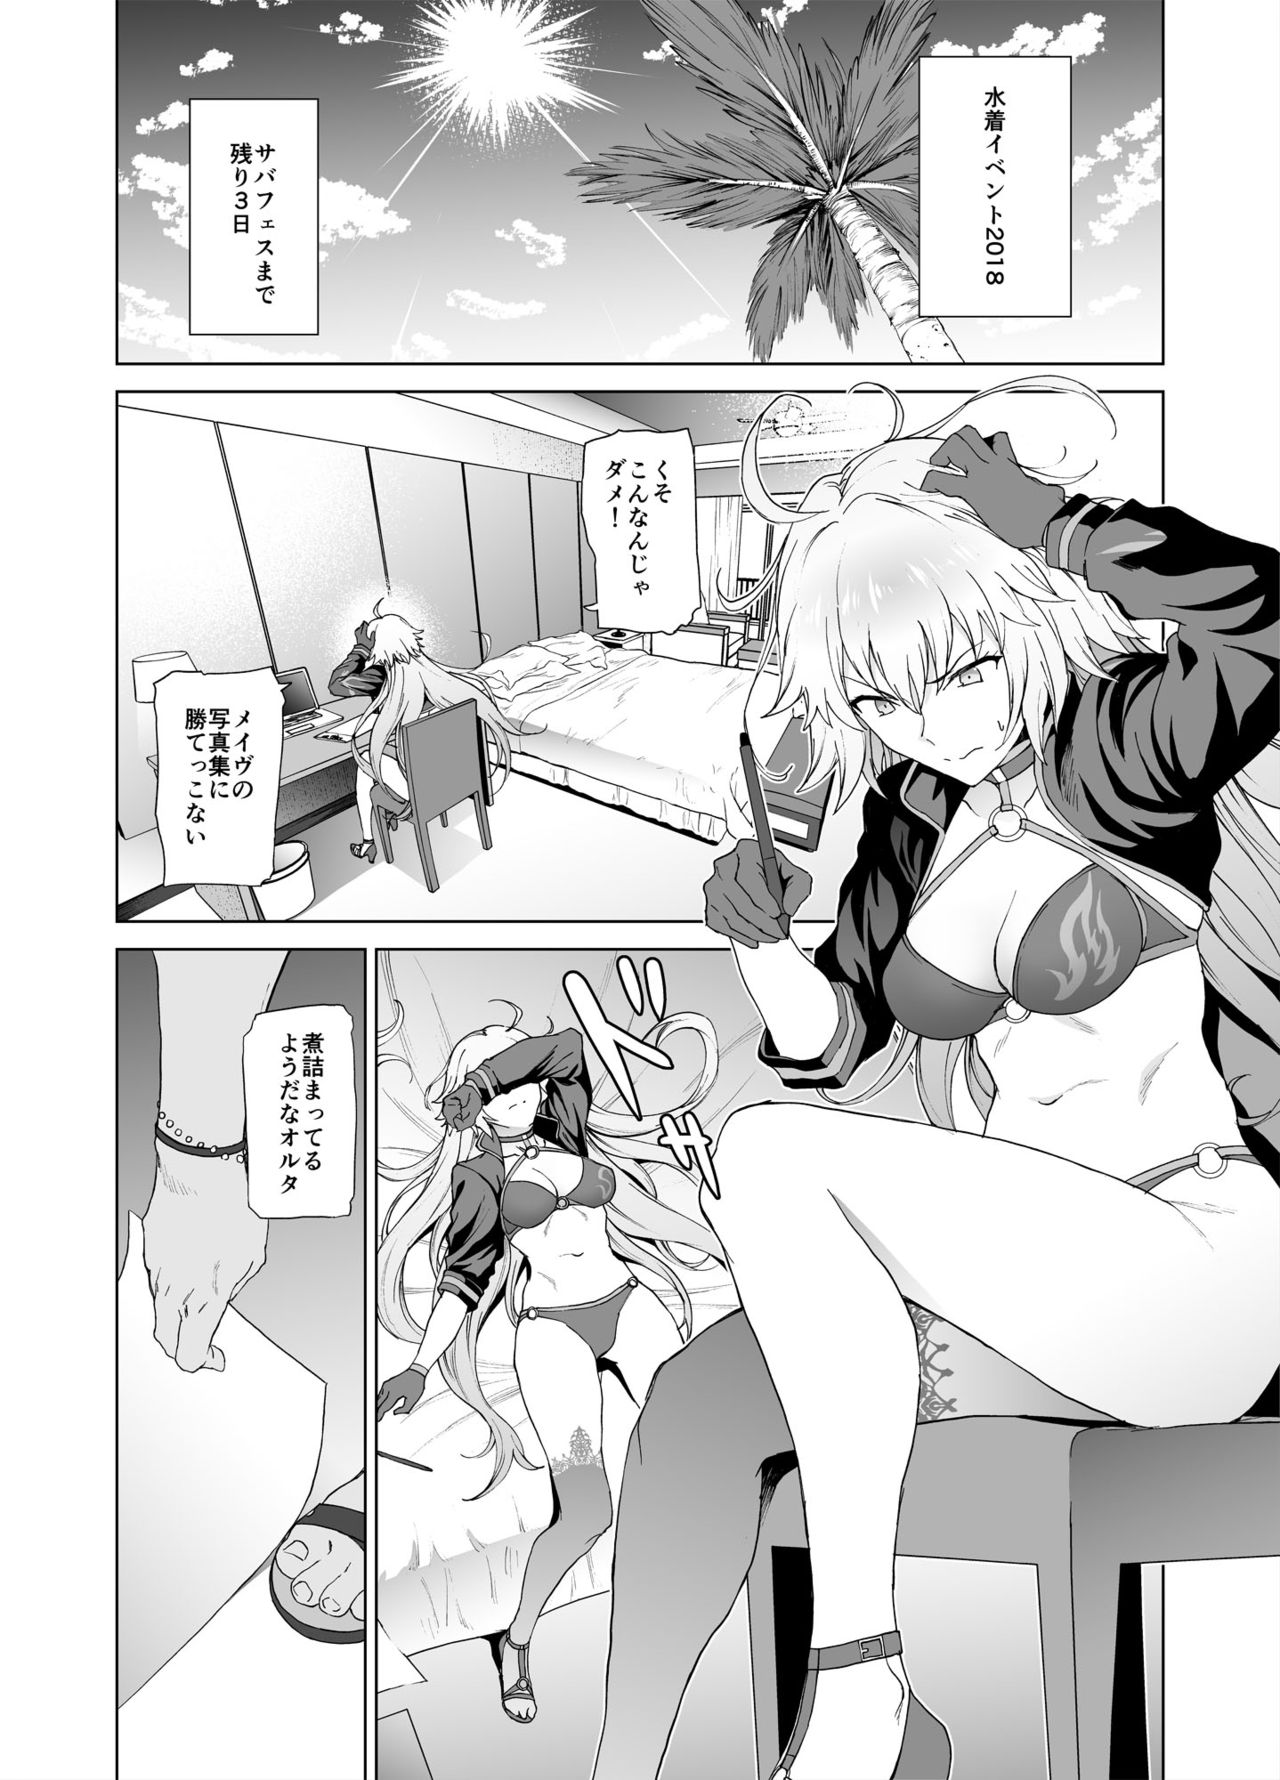 [EXTENDED PART (Endo Yoshiki)] Jeanne W (Fate/Grand Order) [Digital] page 2 full